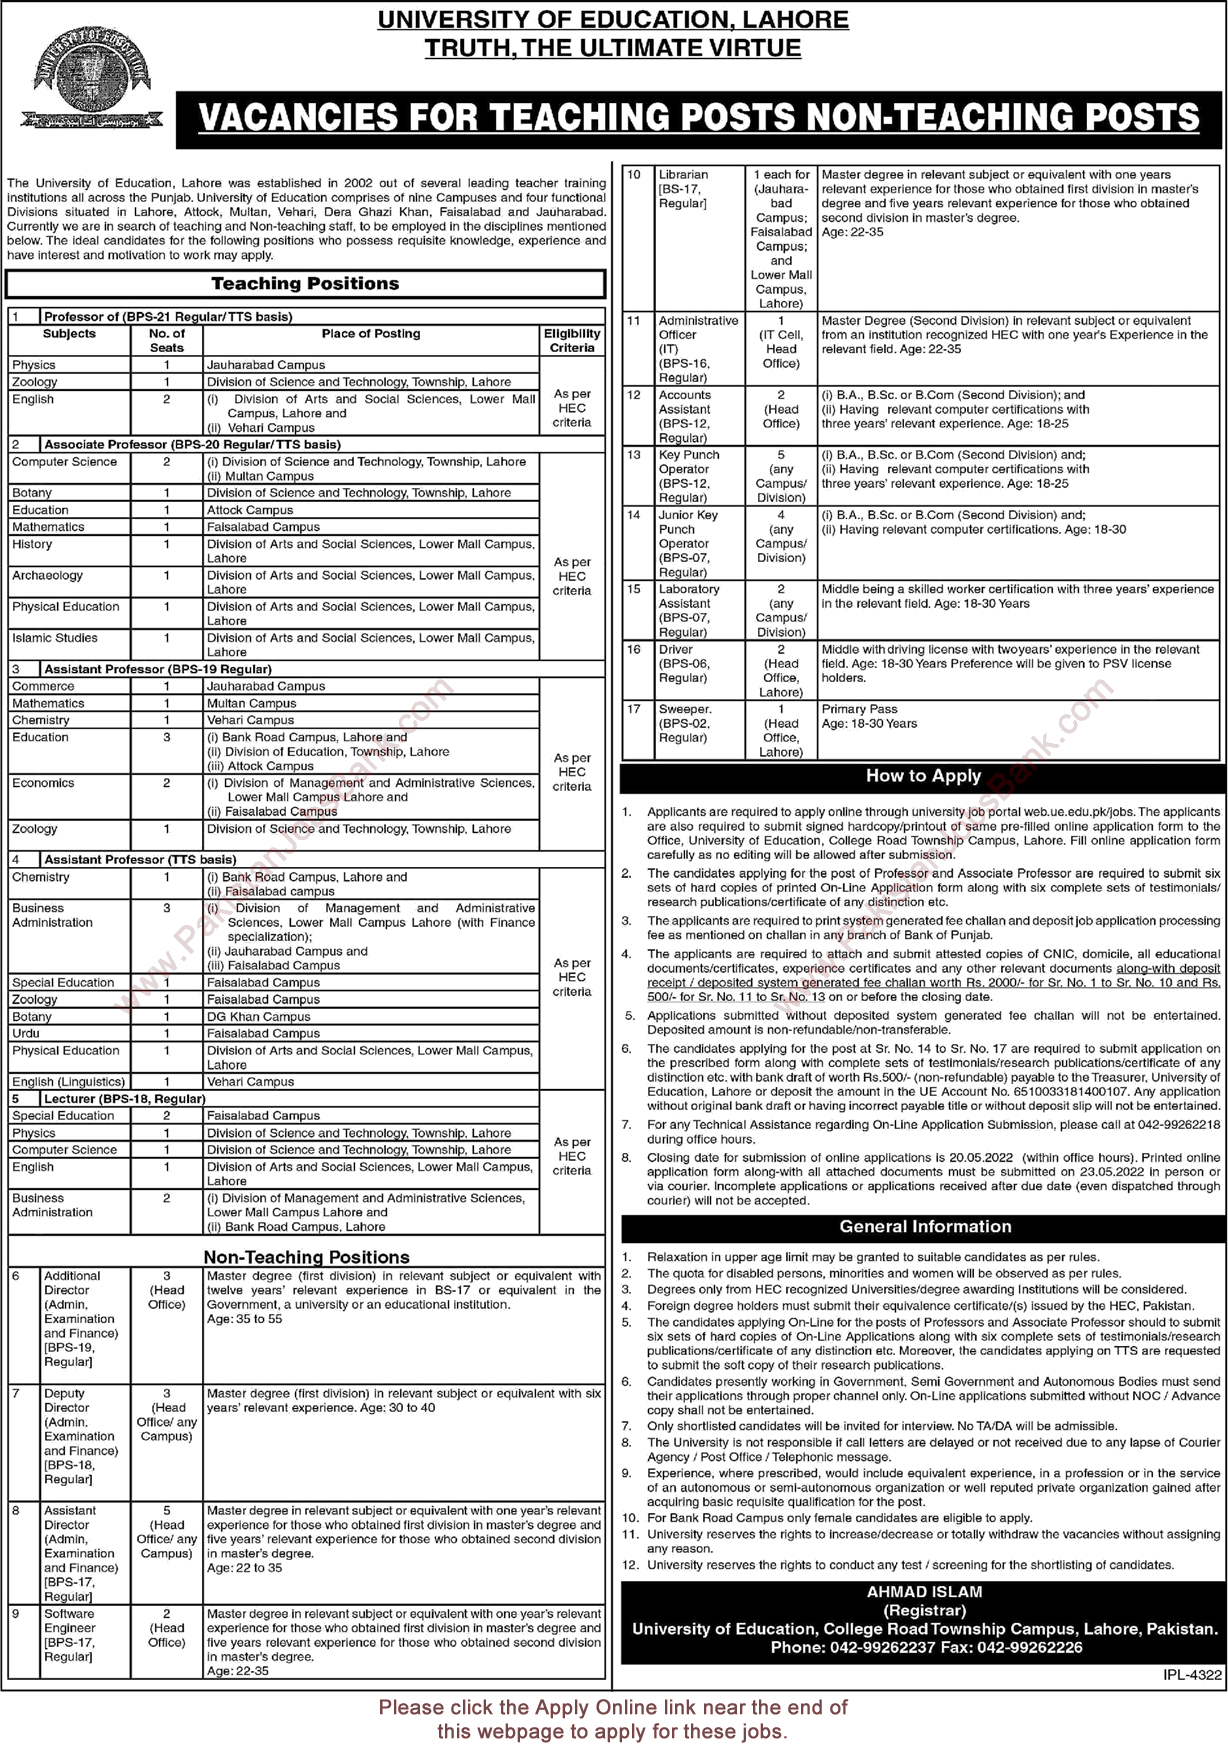 University of Education Jobs 2022 April UOE Apply Online Teaching Faculty & Others Latest